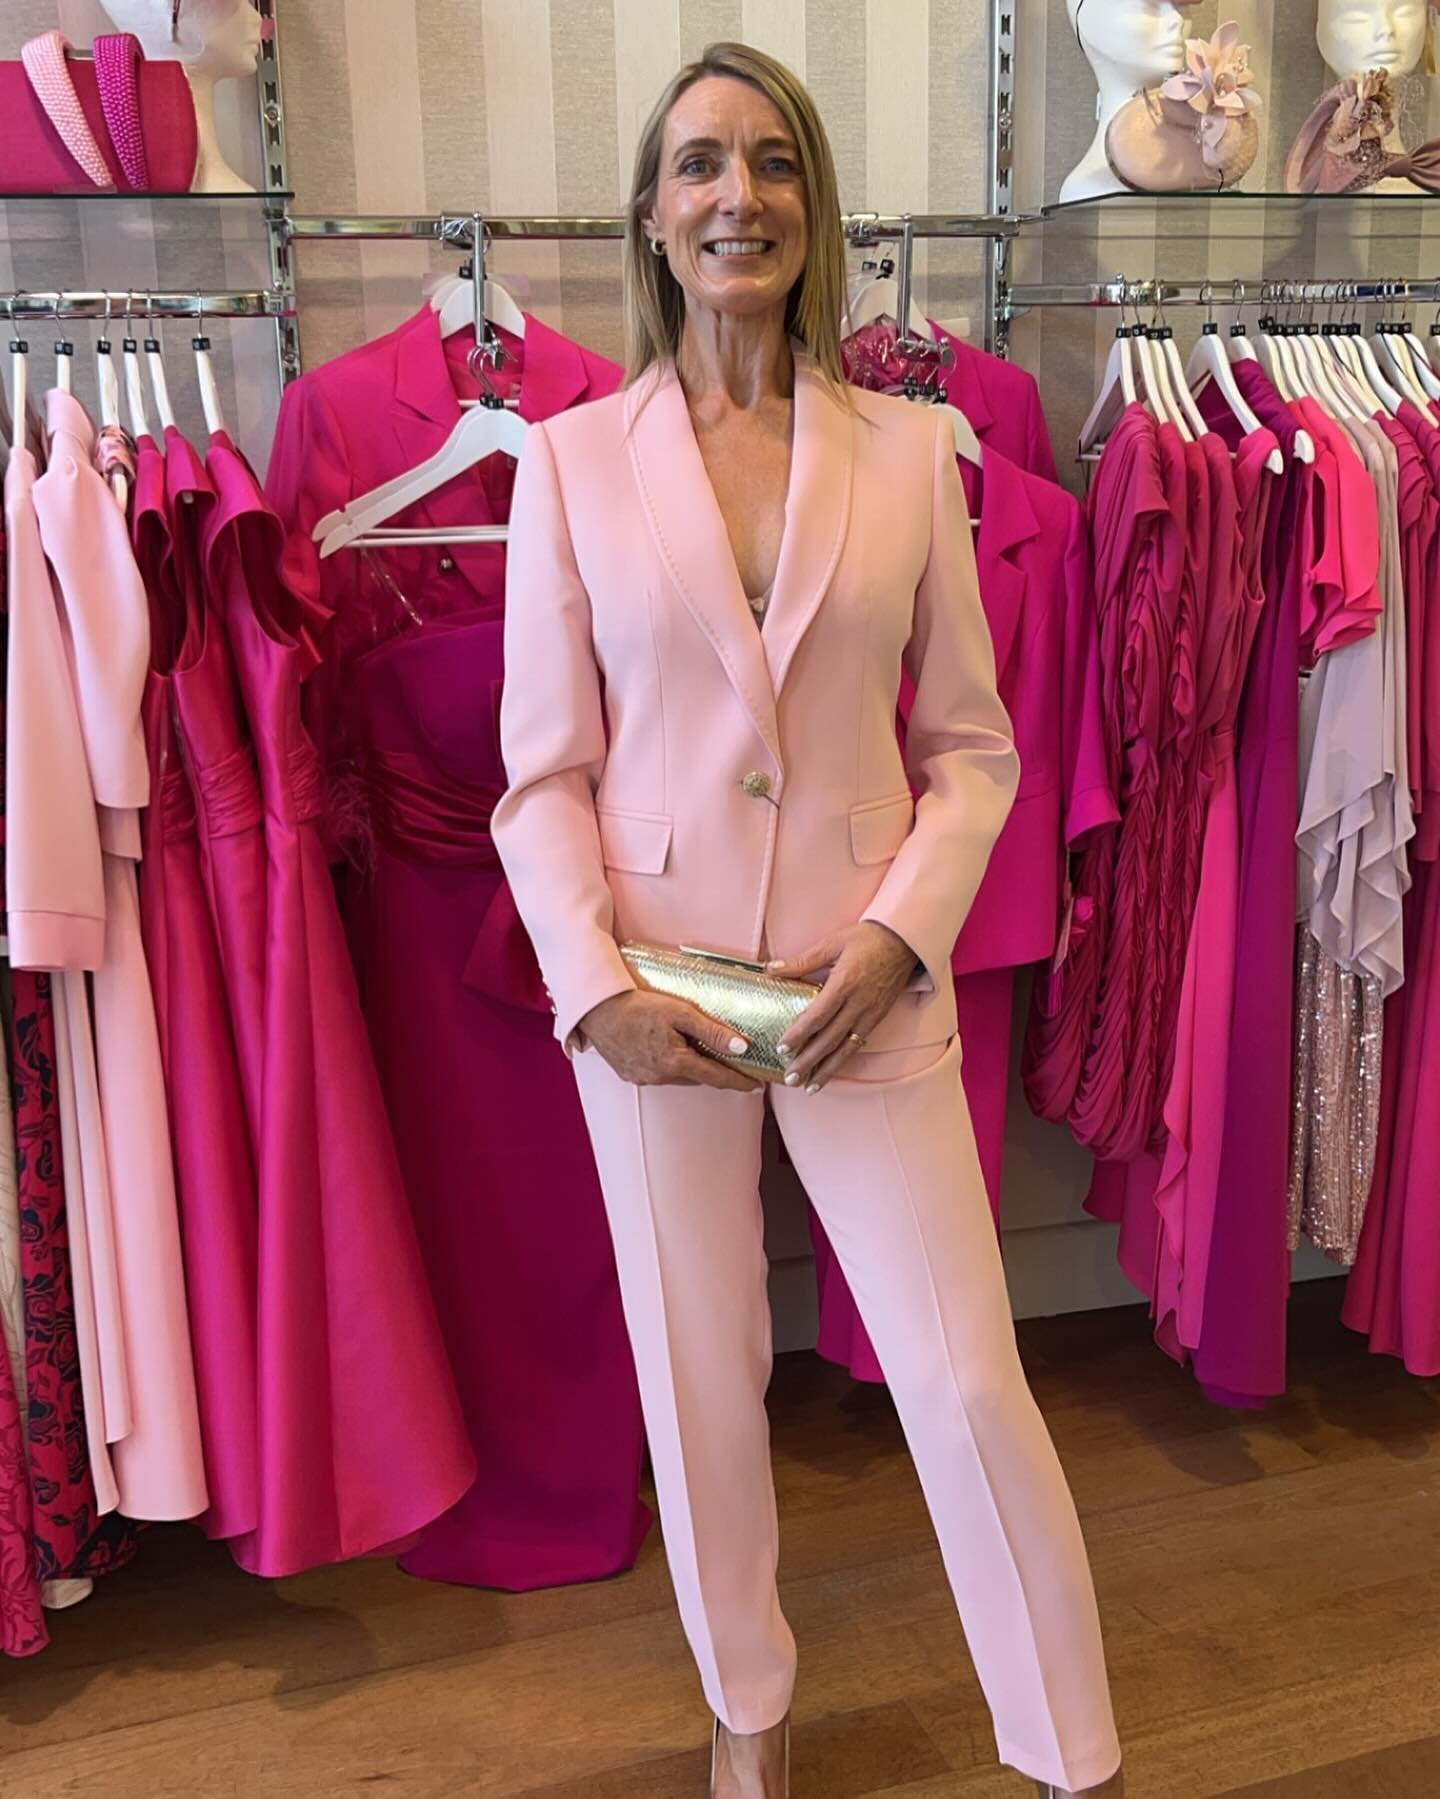 🌸🥂 New&hellip;.it comes in pink too! how stunning is this Suit. You can almost feel the quality &amp; tailoring from the photos. We Love the soft baby pink colour.

Lottie Suit &euro;344

Shop online now or visit us in store 
Fiona x
#newarrivals #